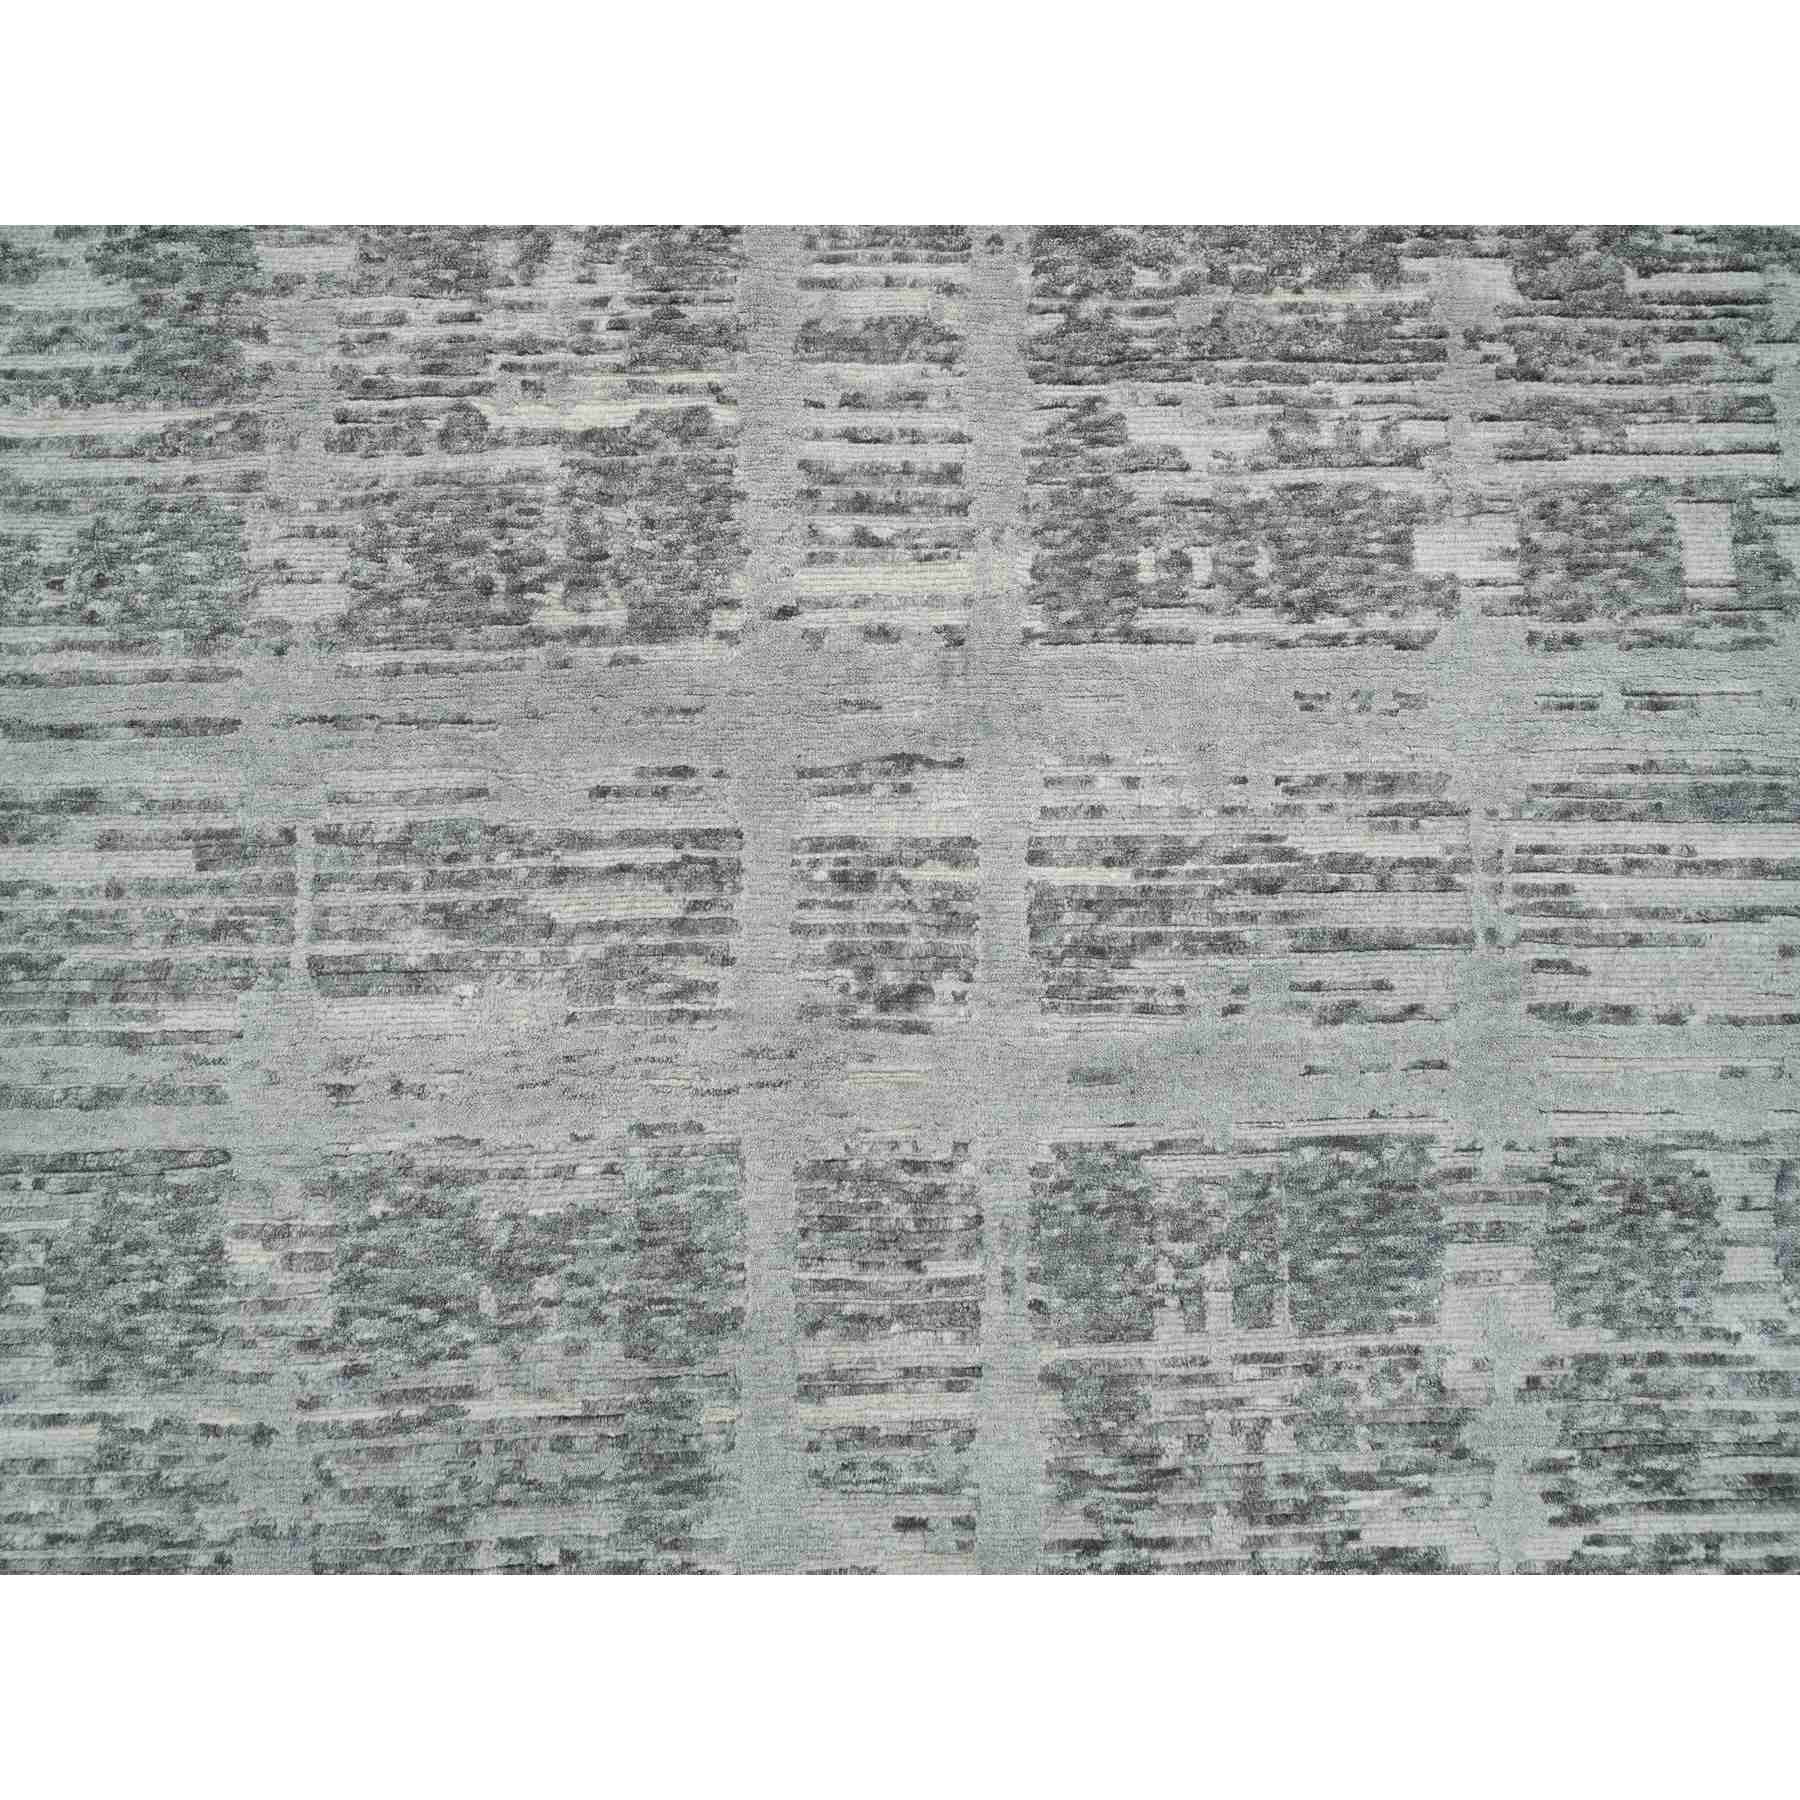 Modern-and-Contemporary-Hand-Knotted-Rug-328215